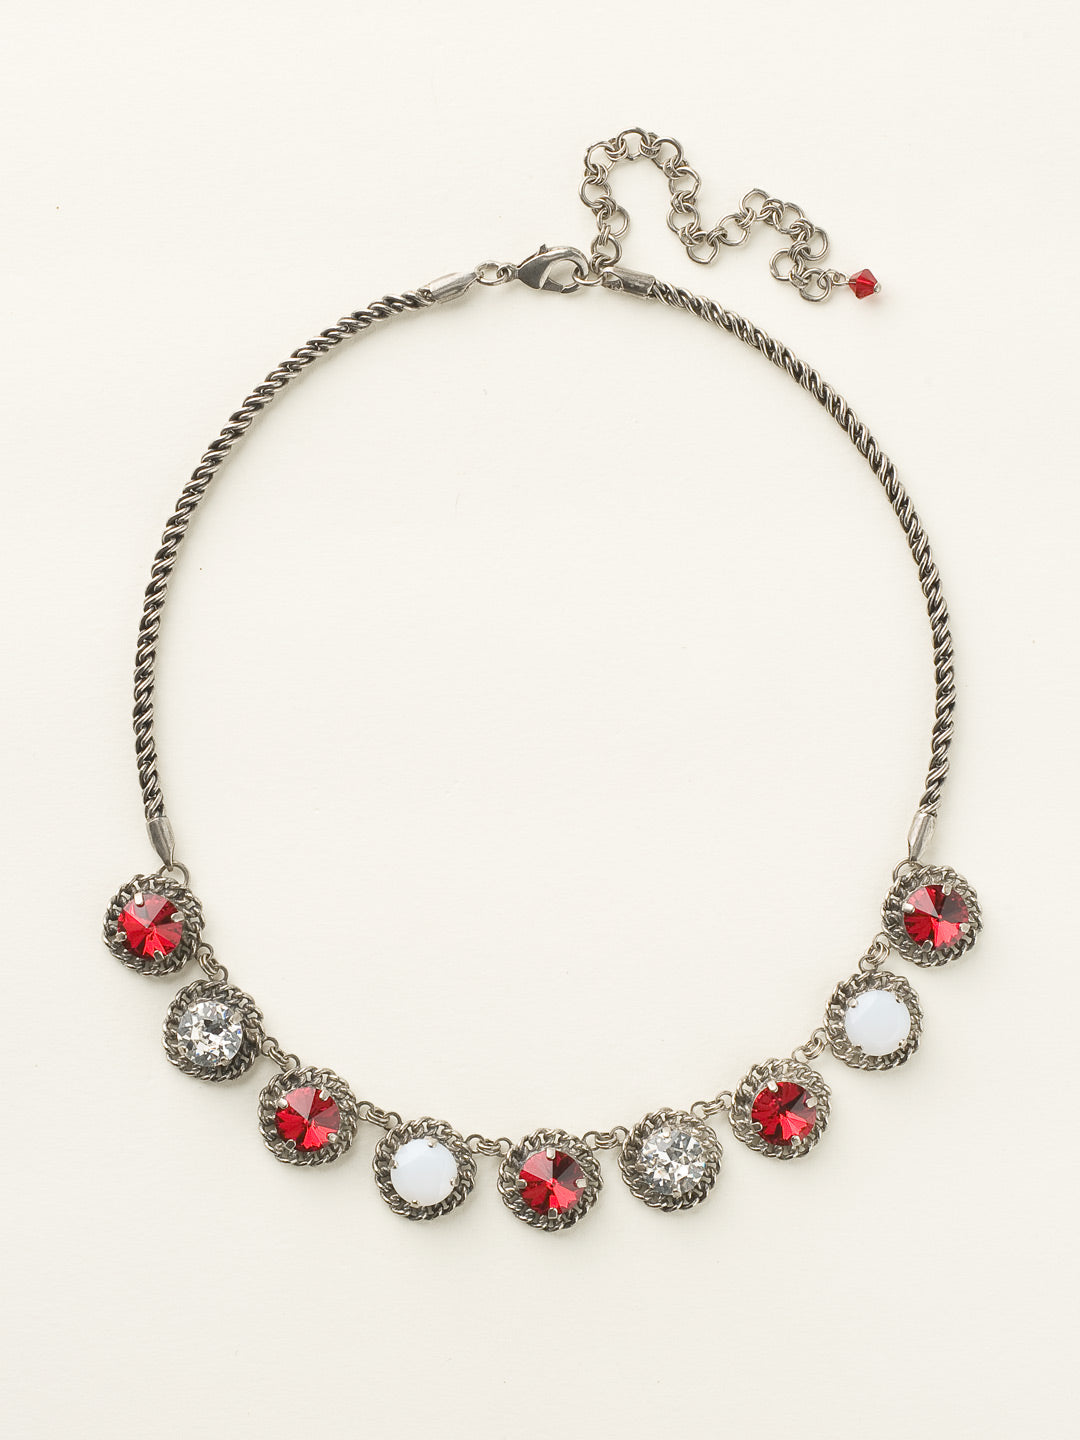 Roped In Statement Necklace - NCN1ASCP - One strand and you'll be roped in. Go back to the basics with this necklace of crystals, in a vintage inspired setting that will add glamour to any look.